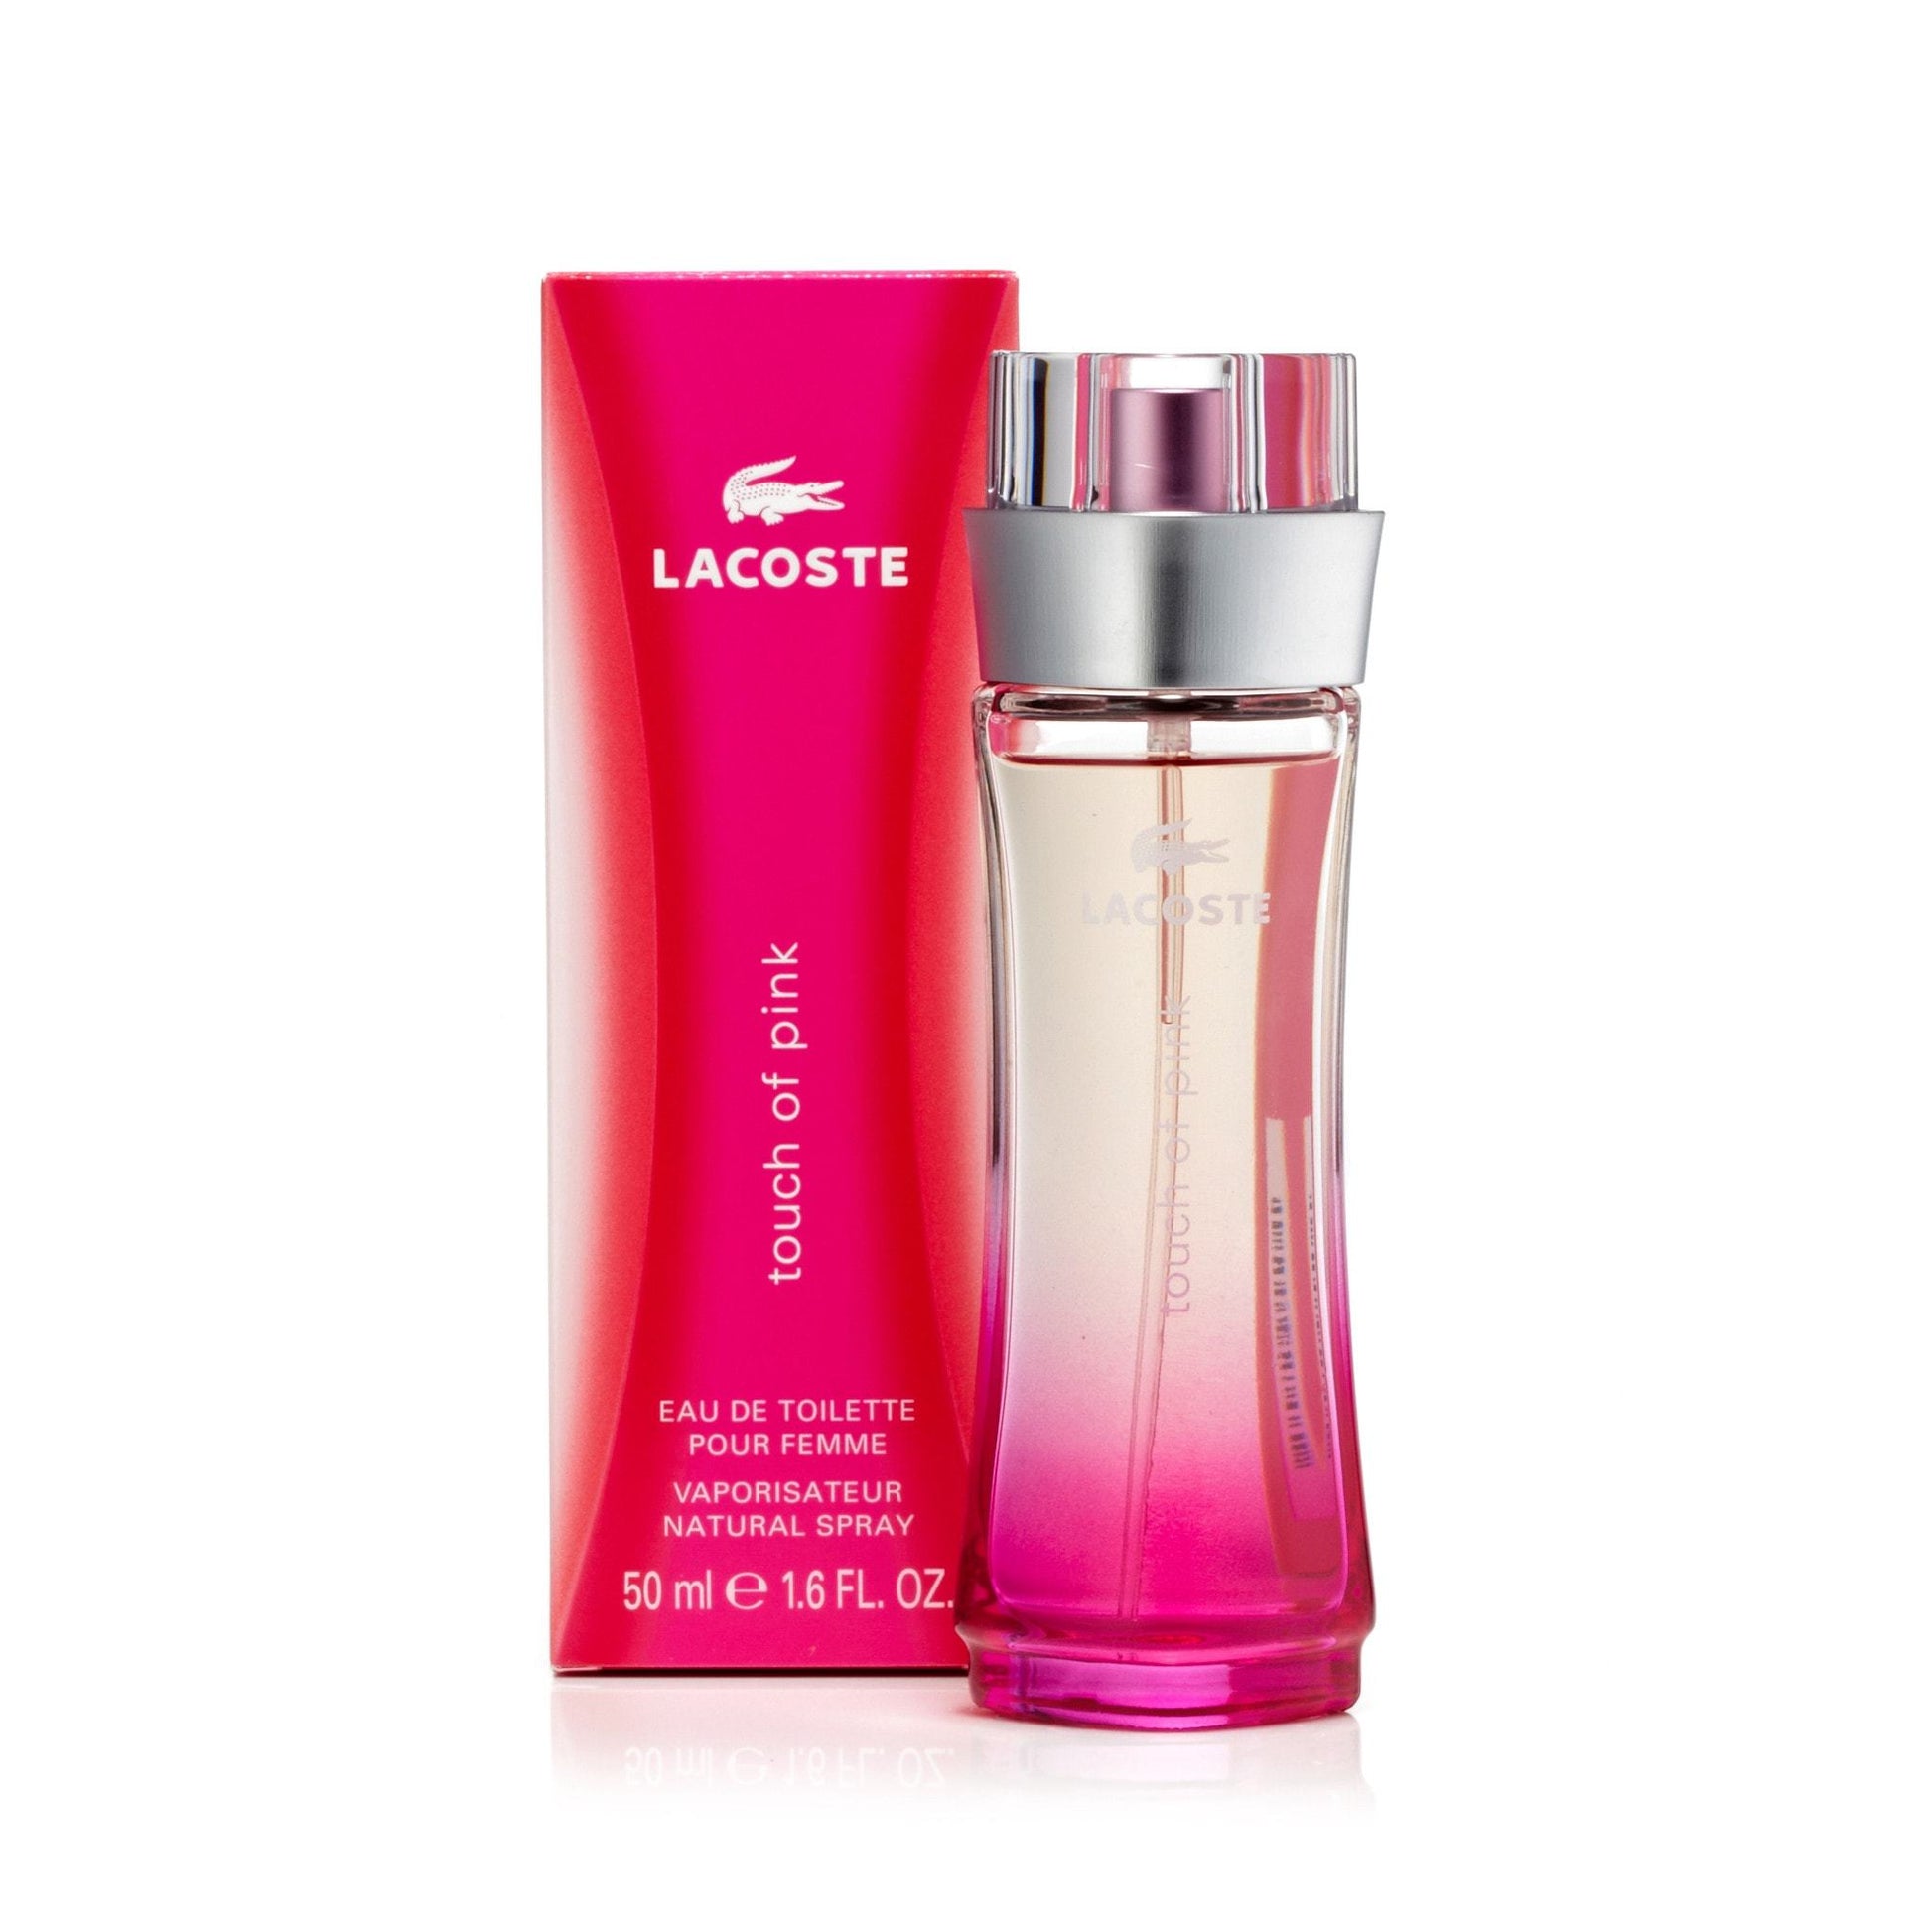 Touch of Pink Eau de Toilette Spray for Women by Lacoste, Product image 4